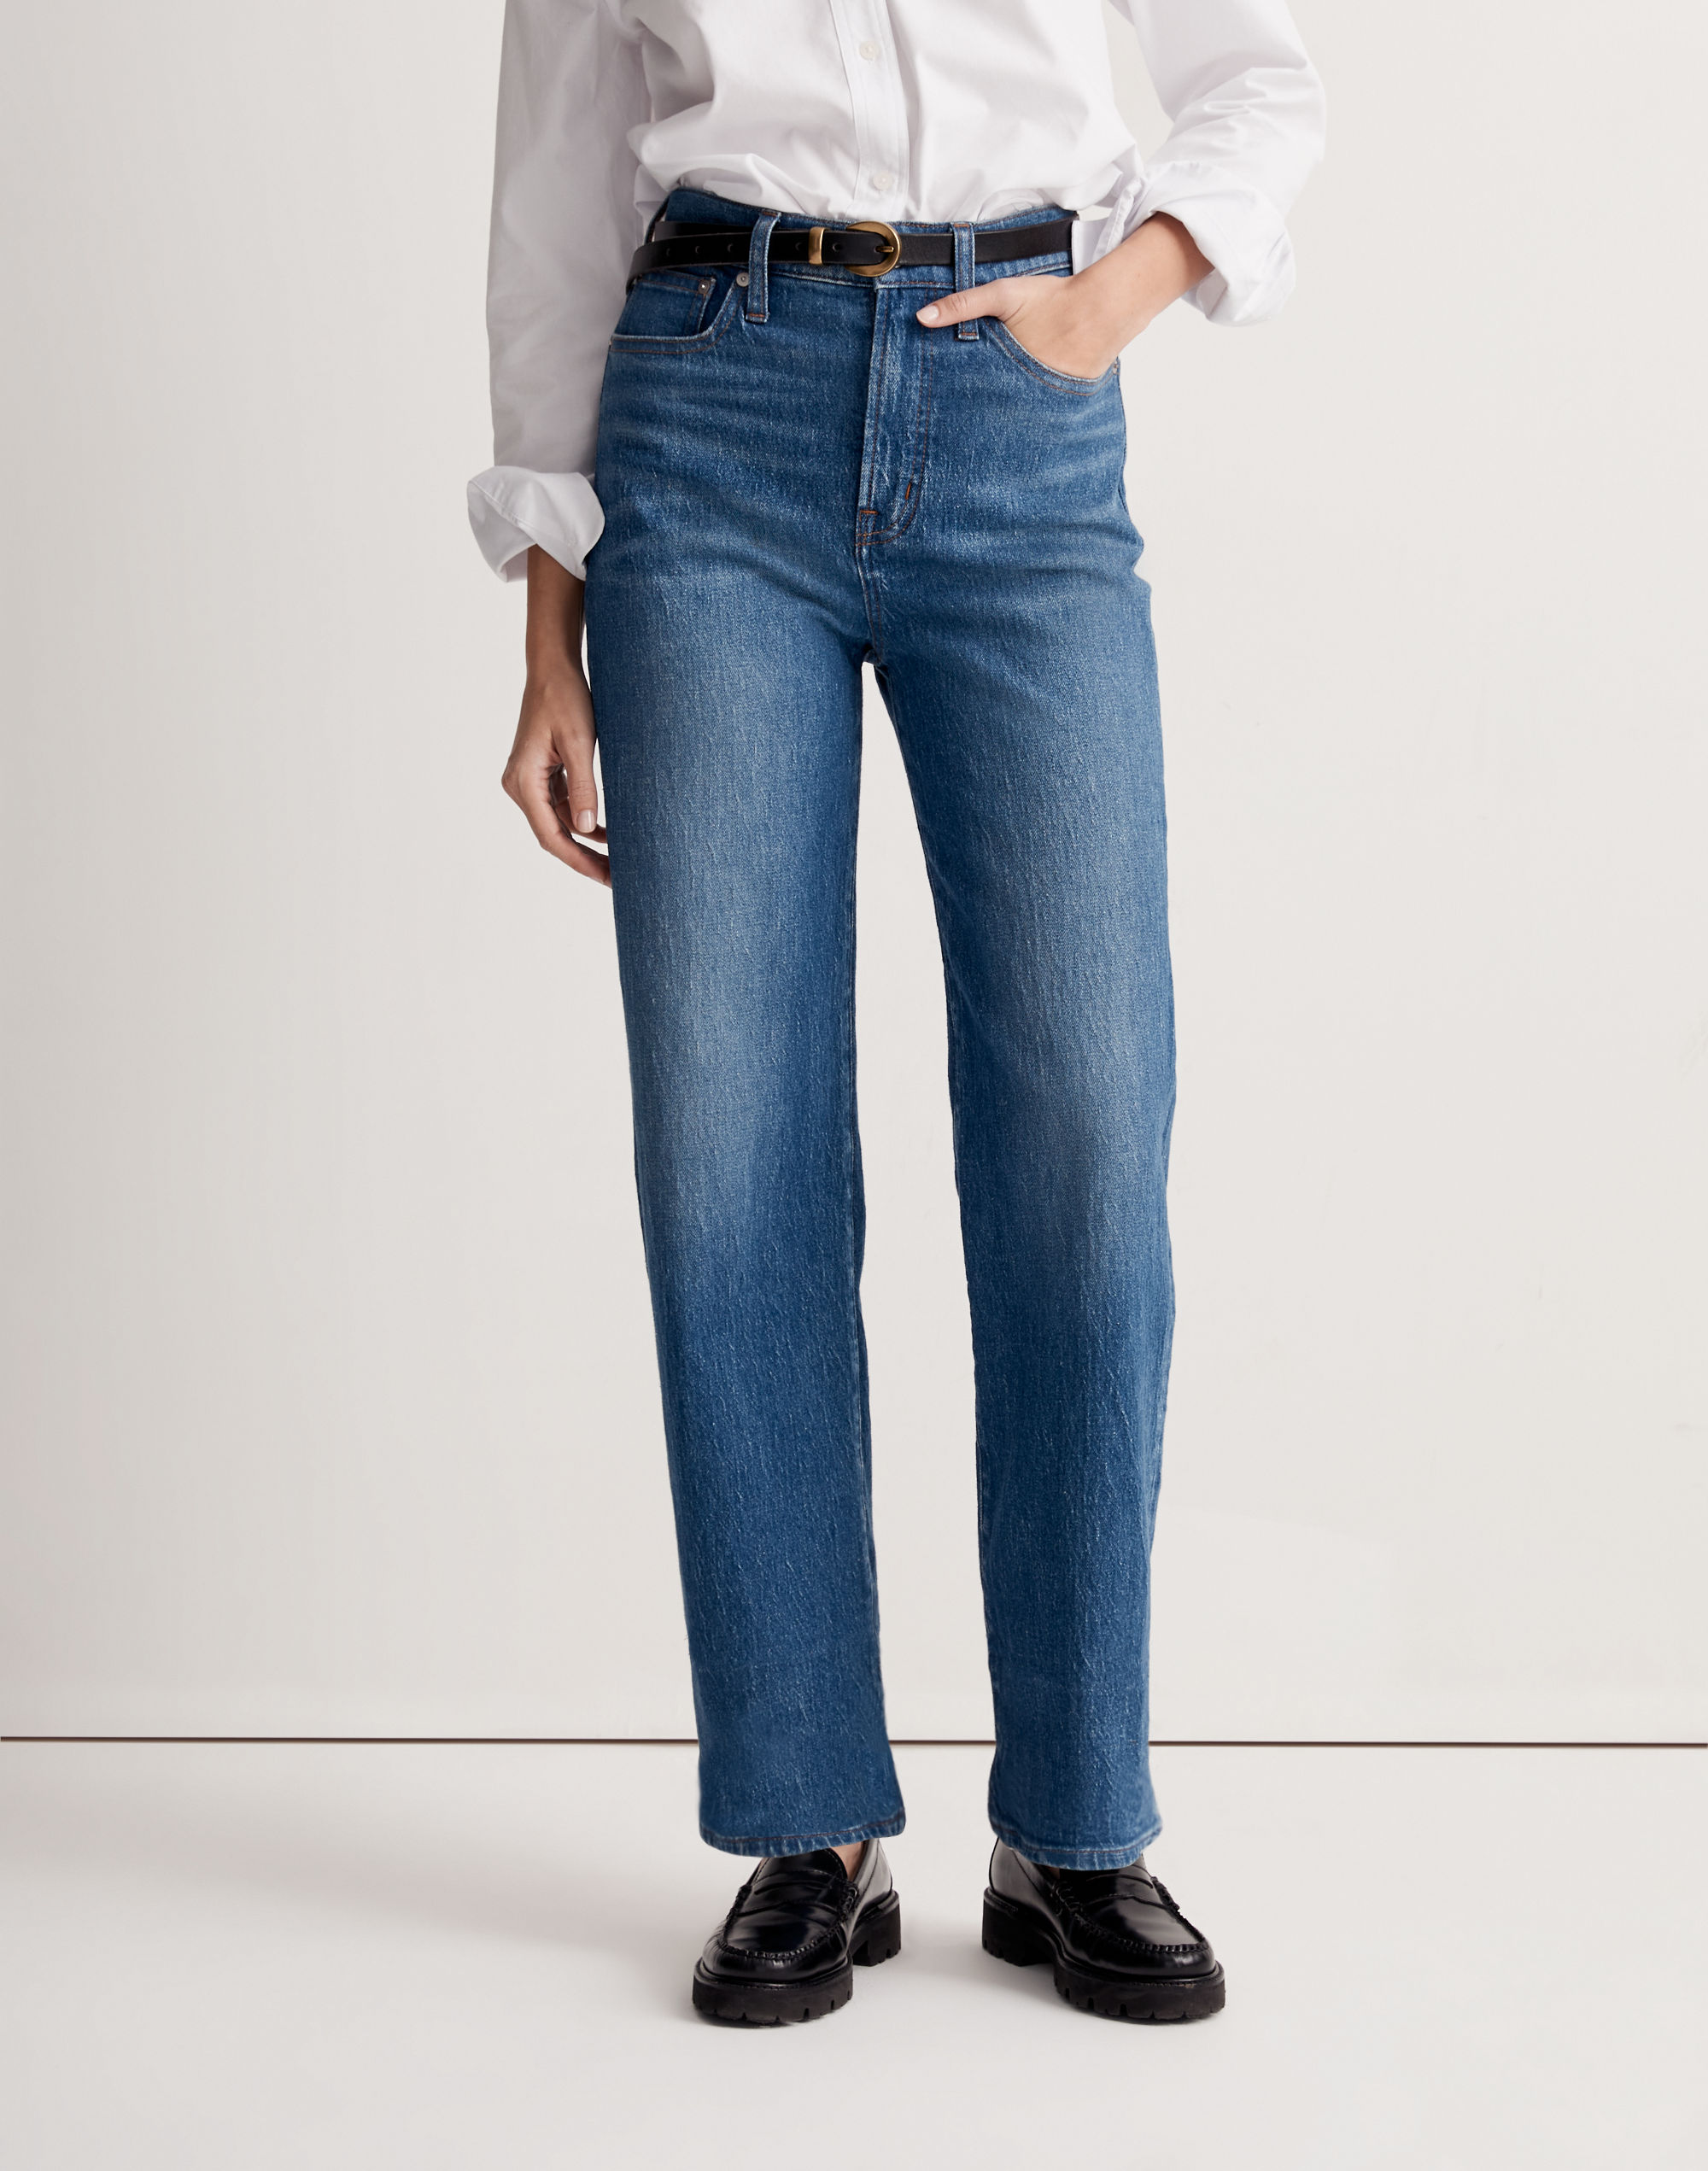 The Tall Perfect Vintage Wide-Leg Jean in Leifland Wash